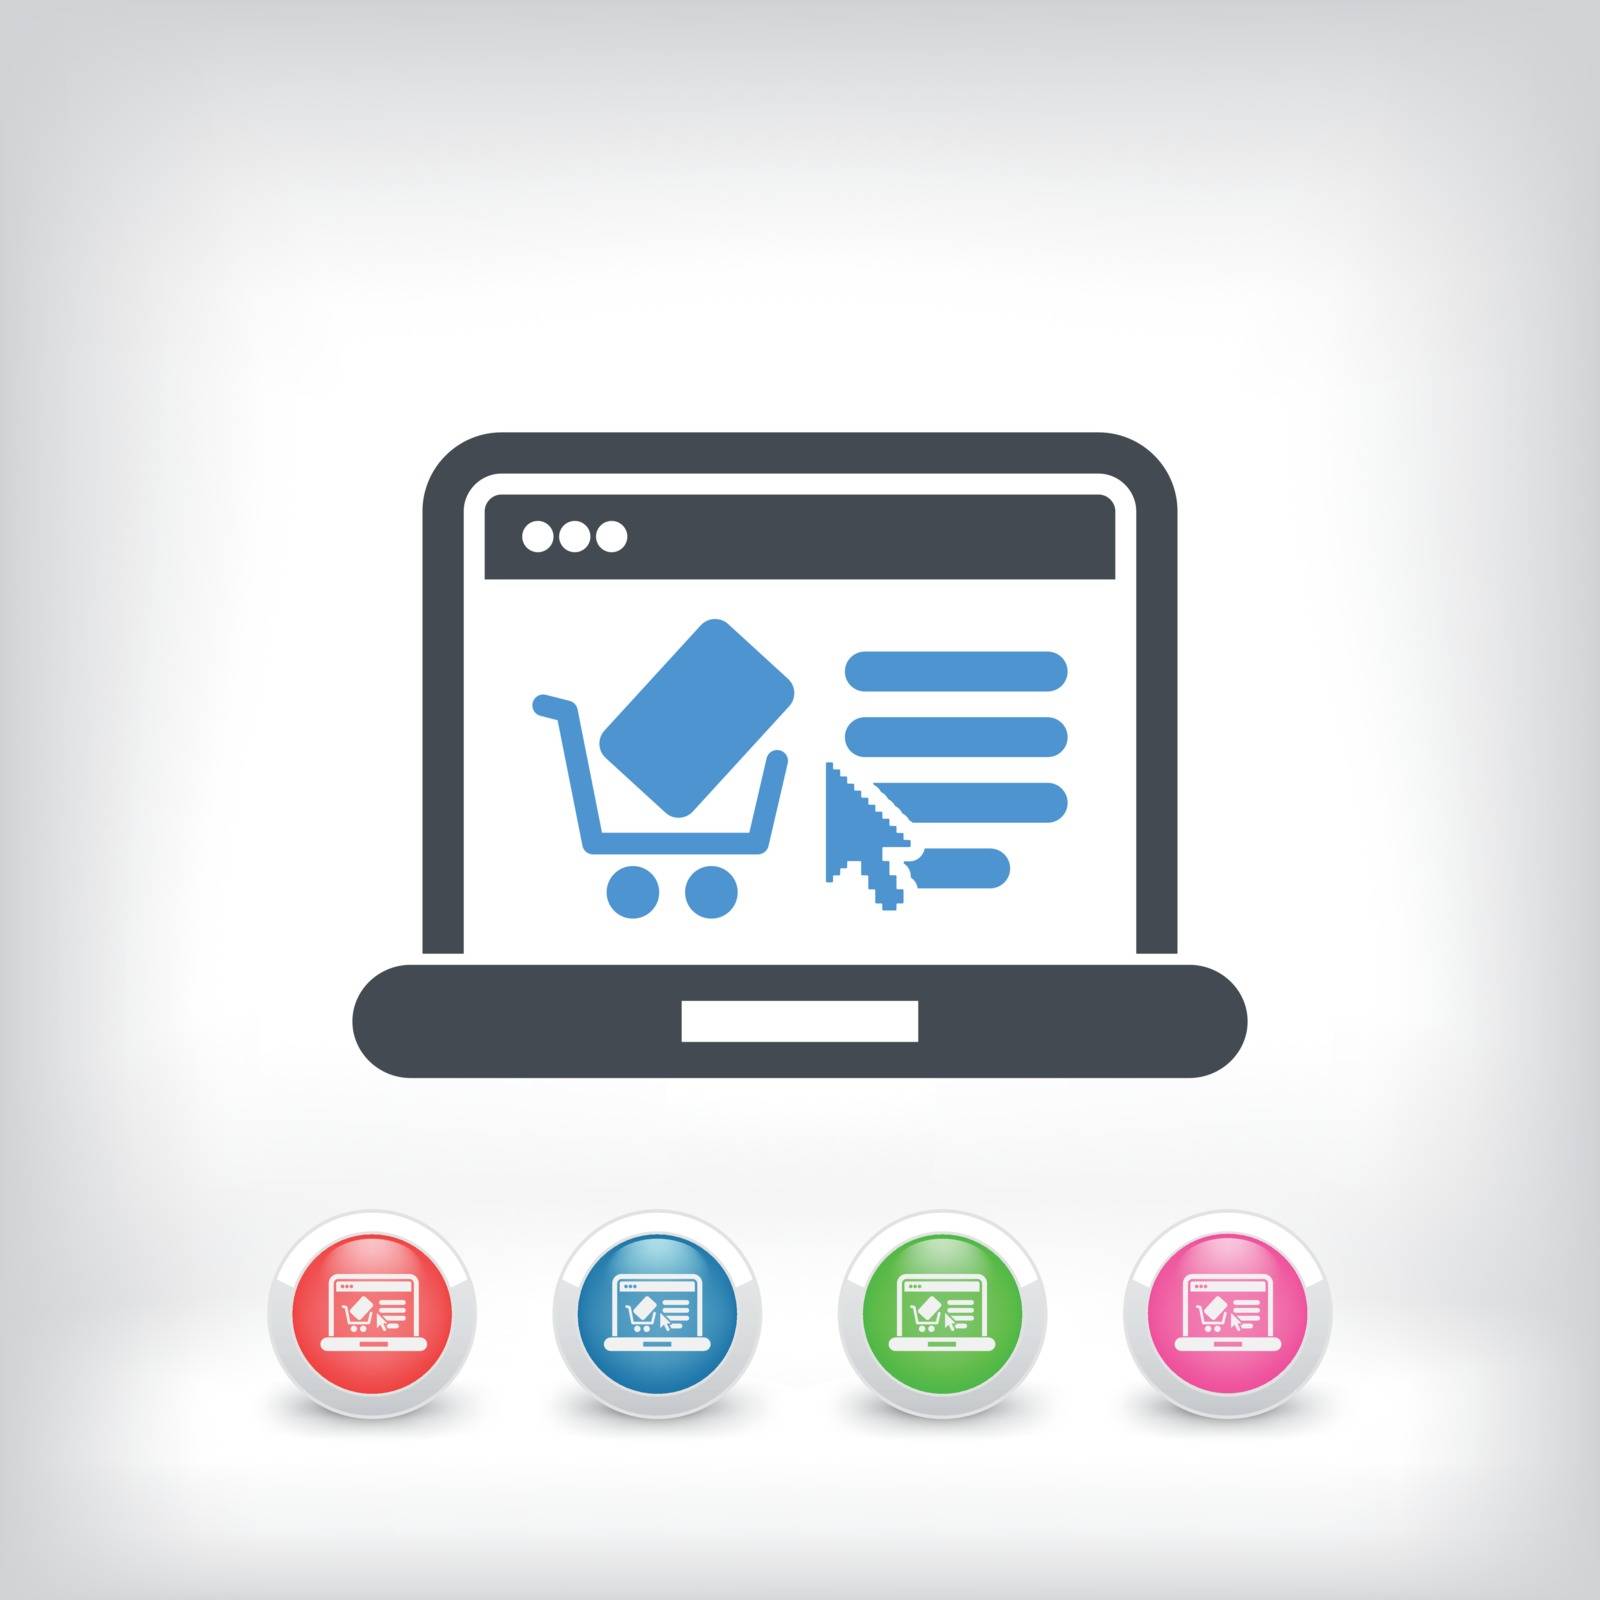 E-commerce website icon by myVector